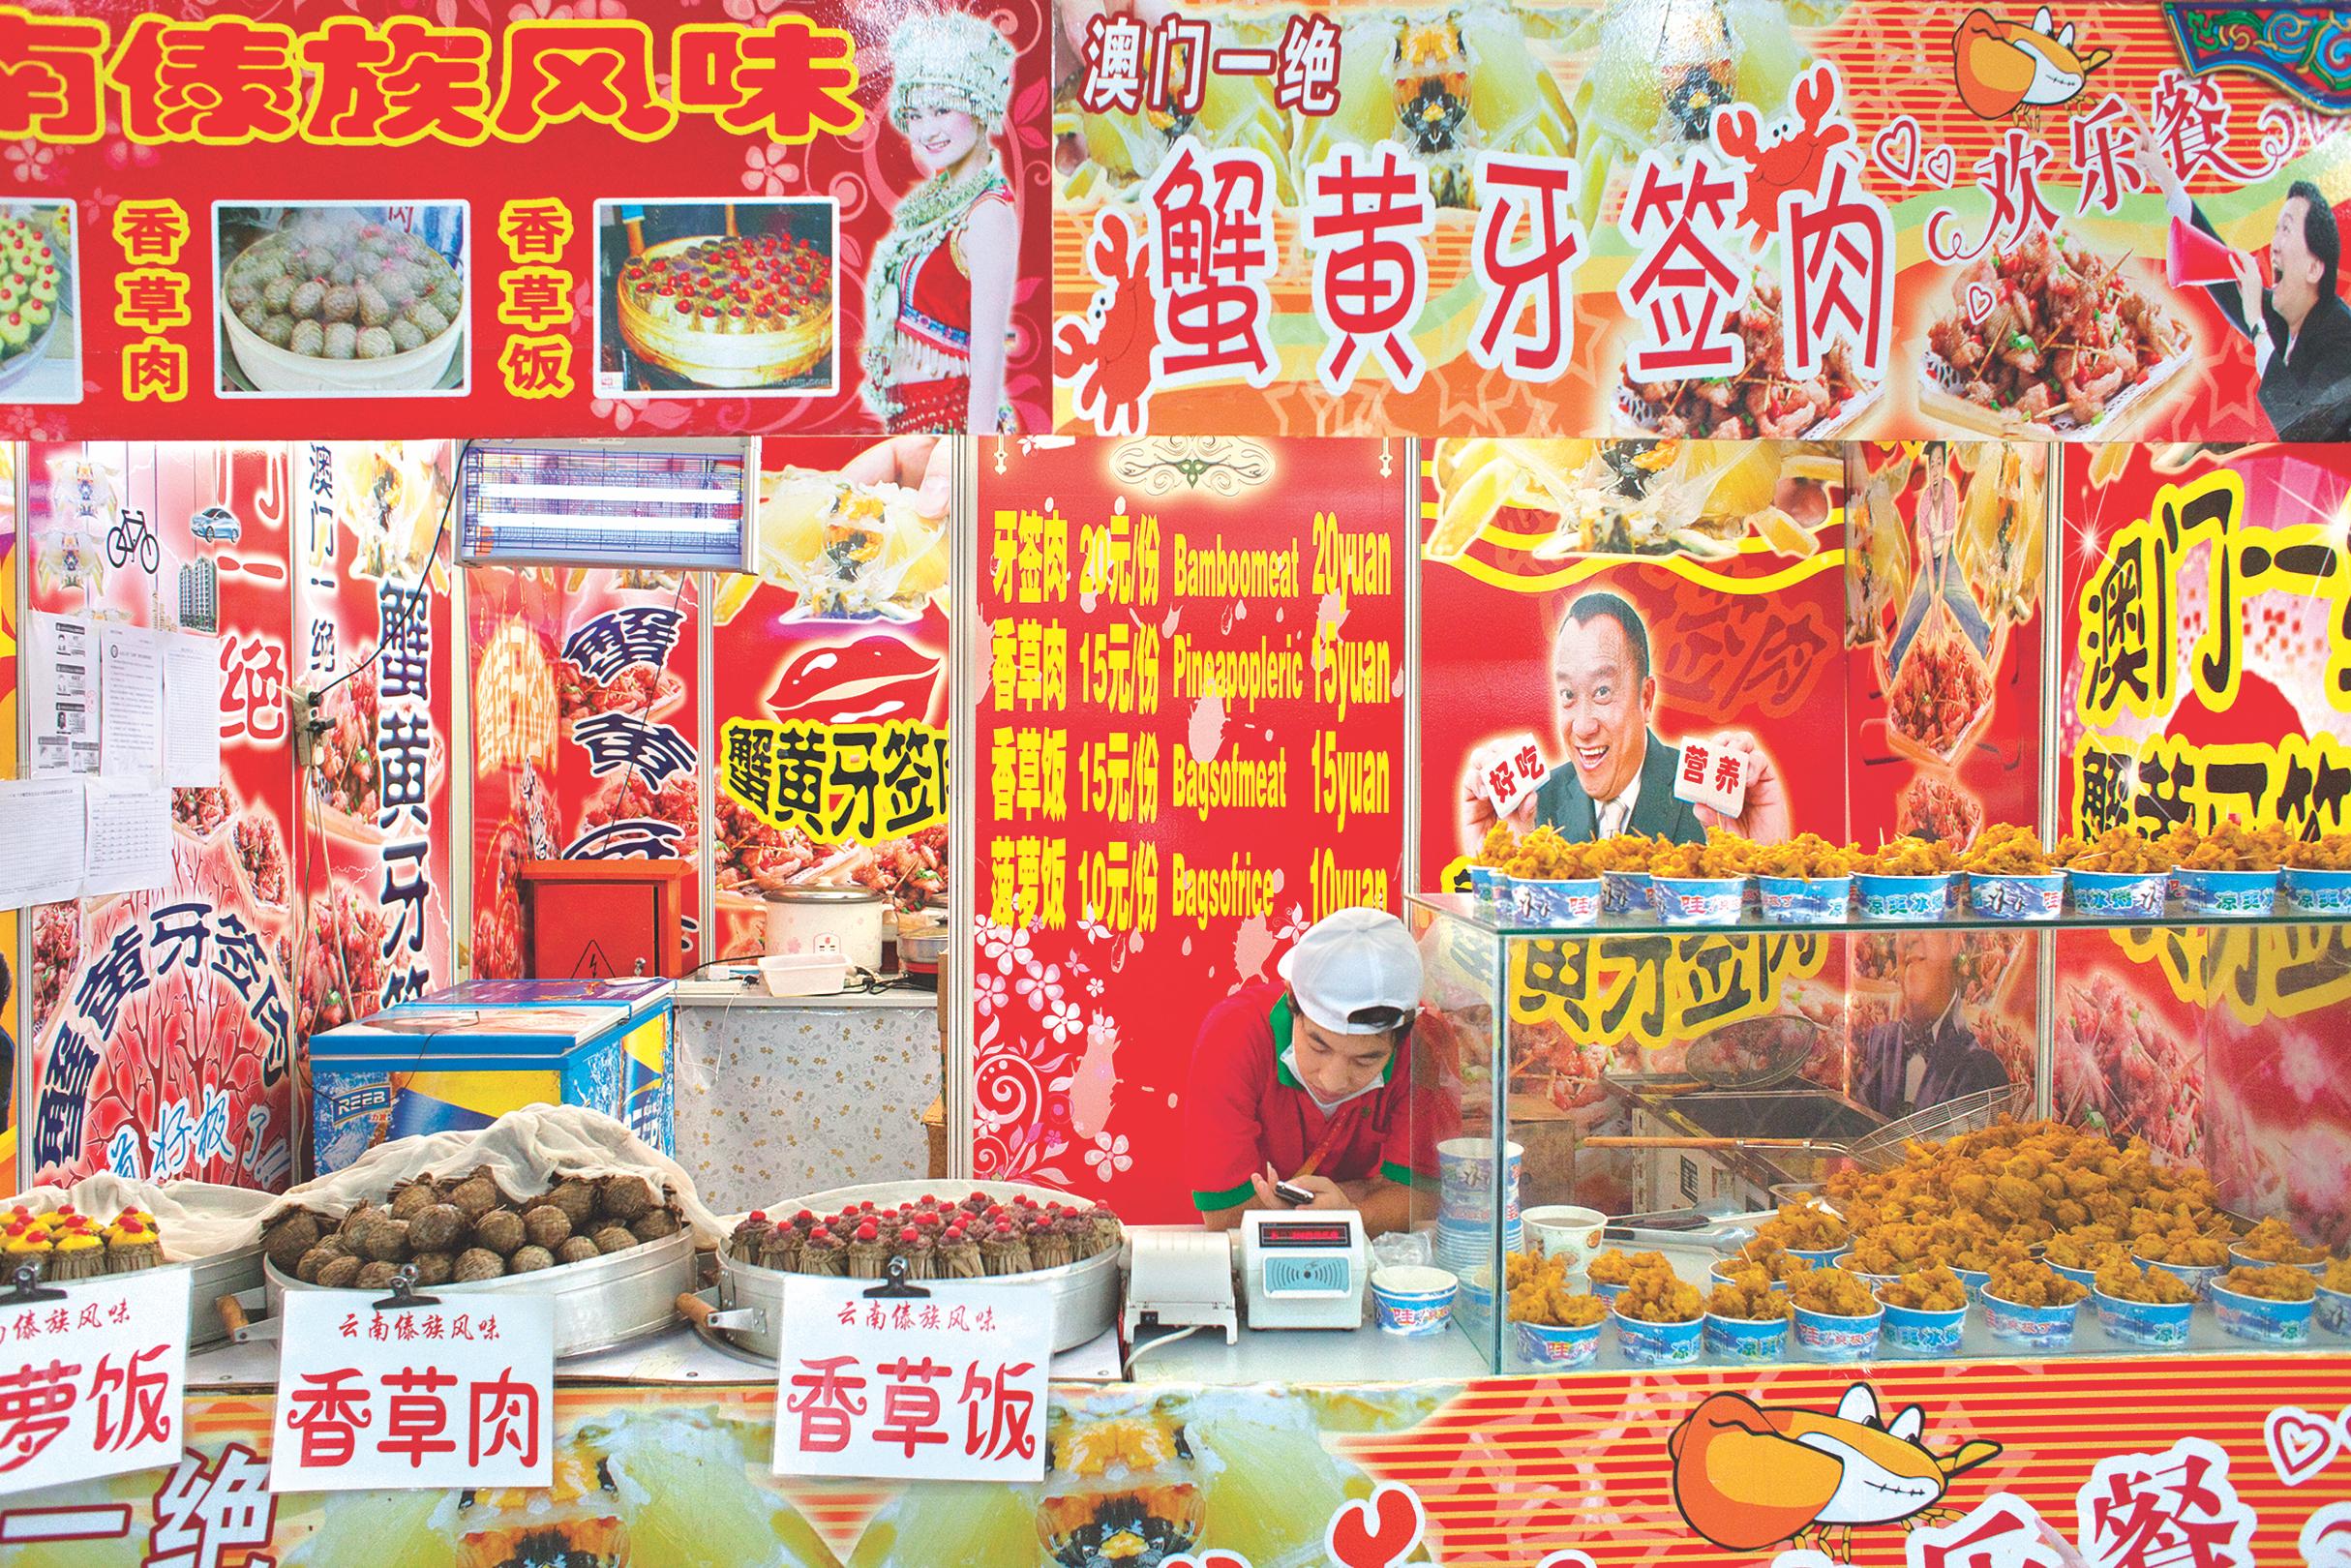 Anja Hitzenberger Figurative Photograph - Chinese Fast Food 1 (aka Red) - 21st Century Color Food Photography Edition 